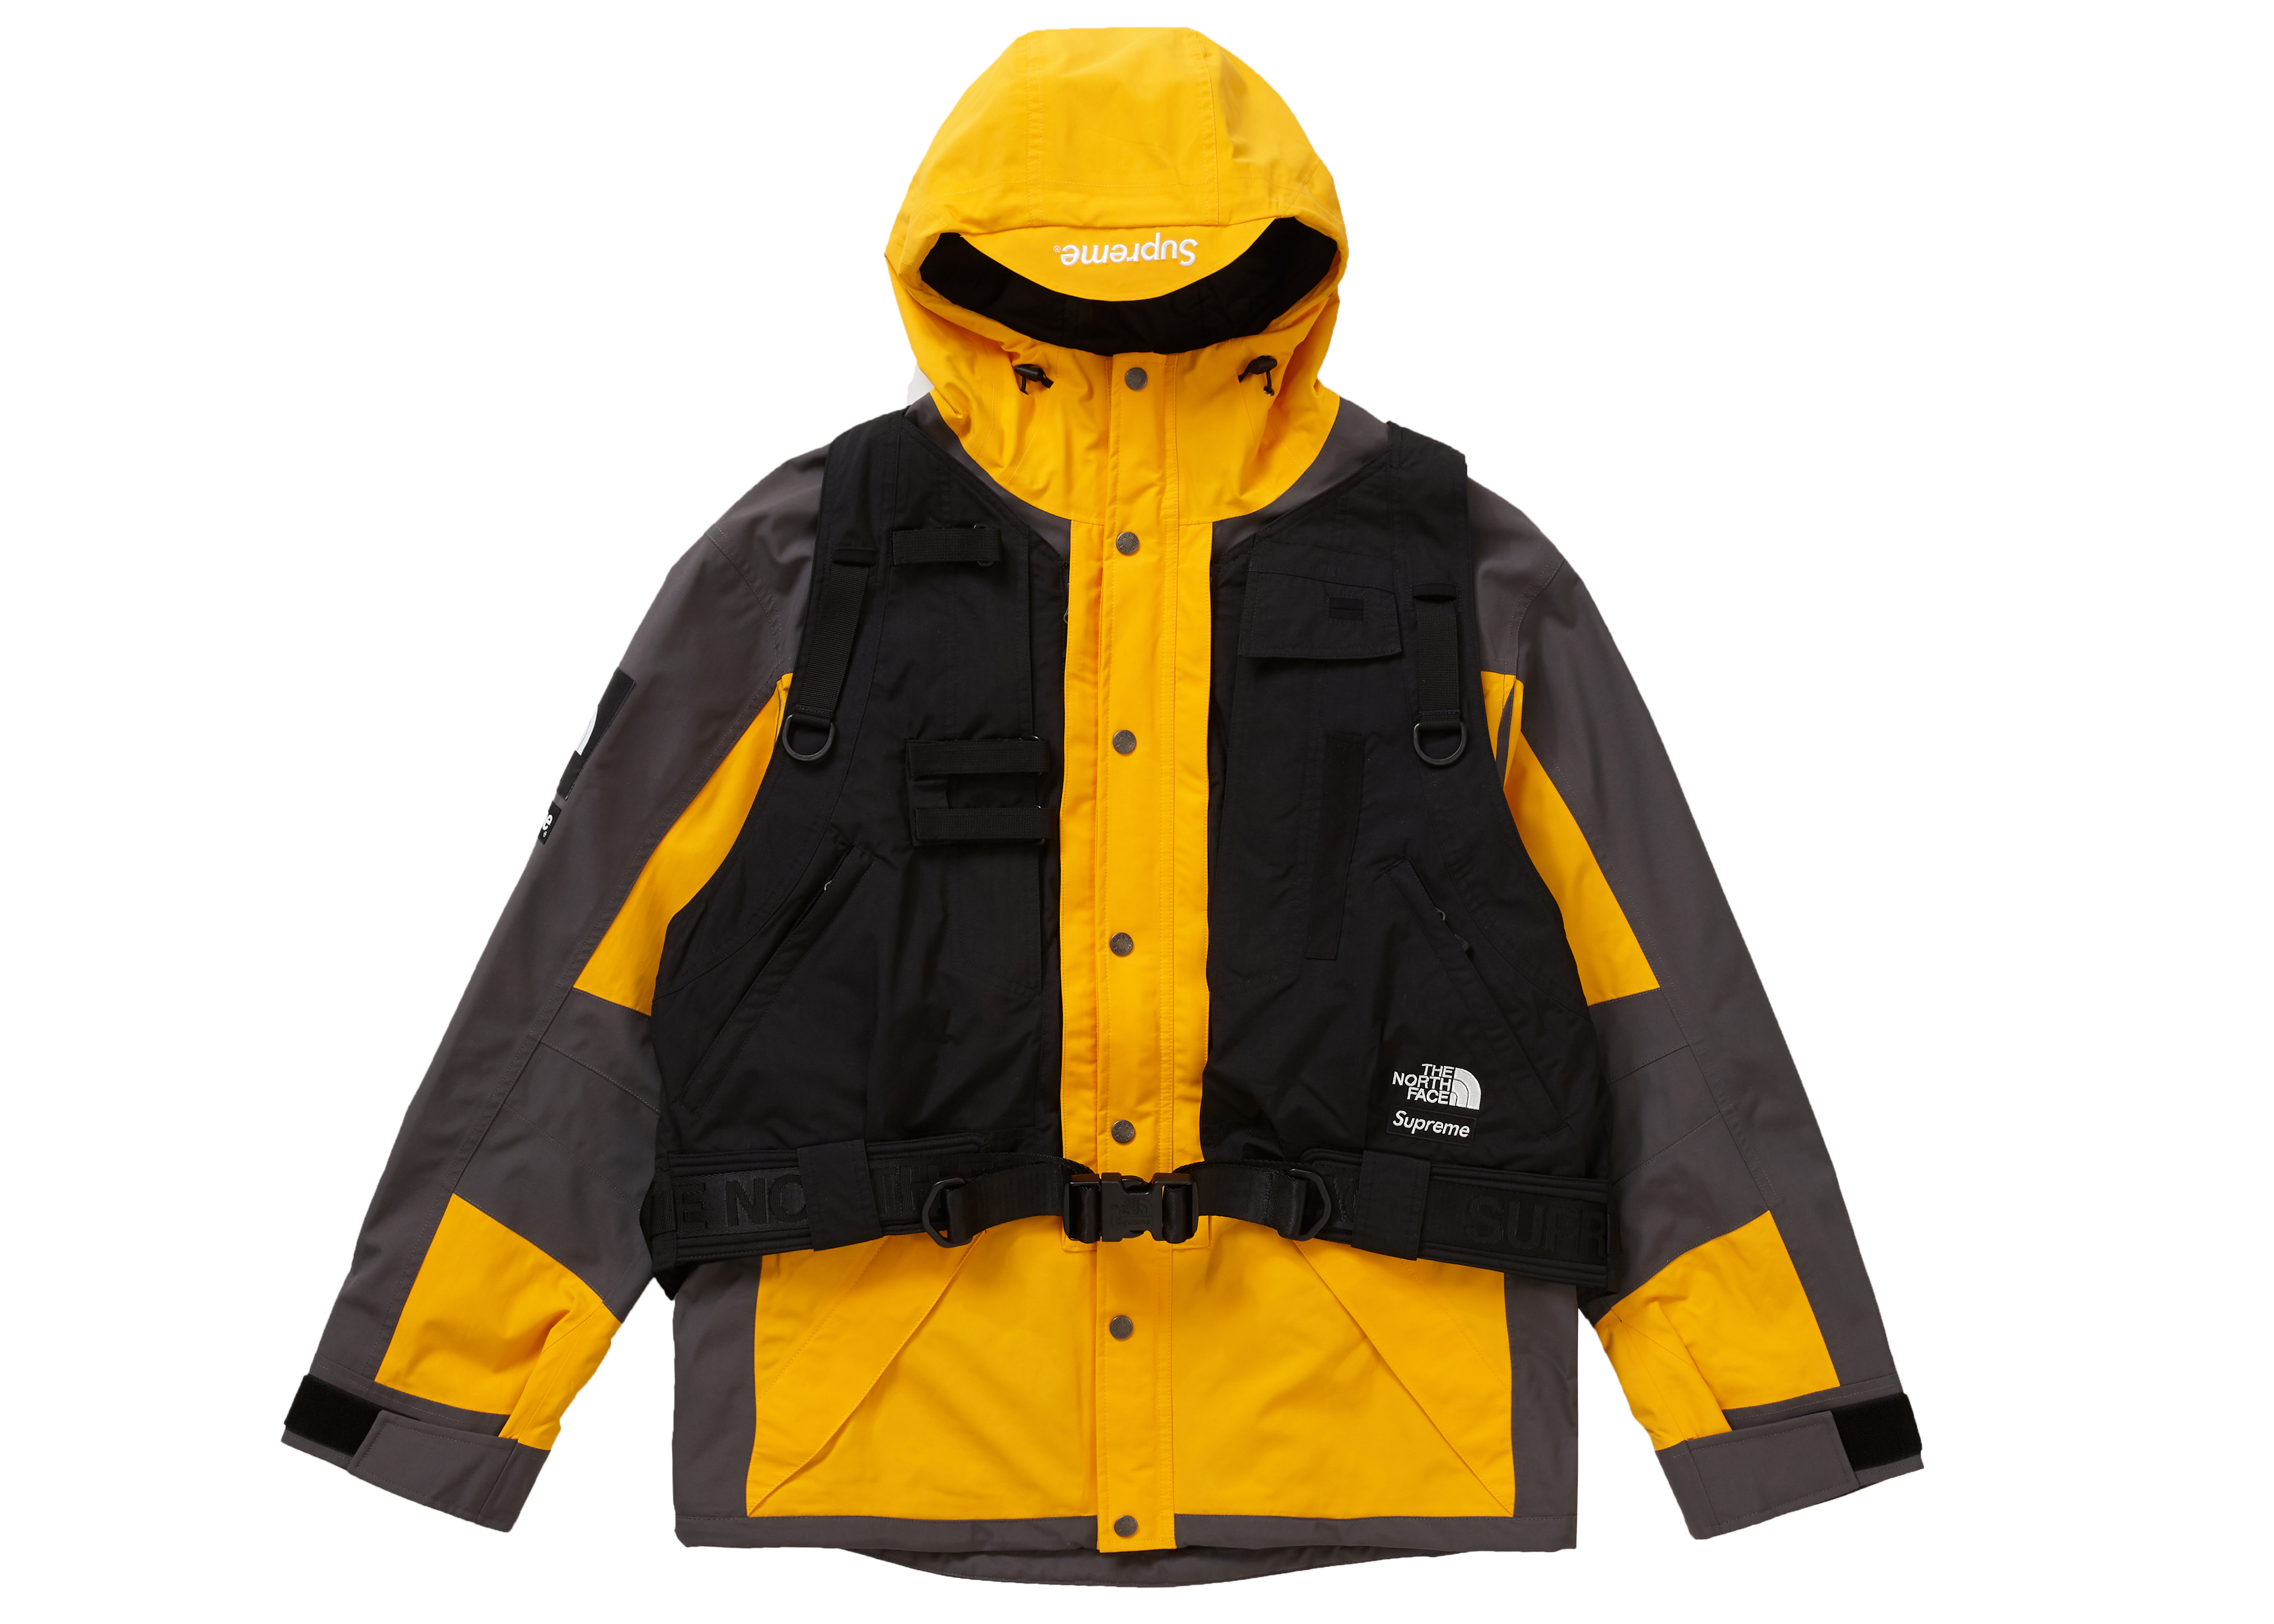 Buy Supreme The North Face Streetwear